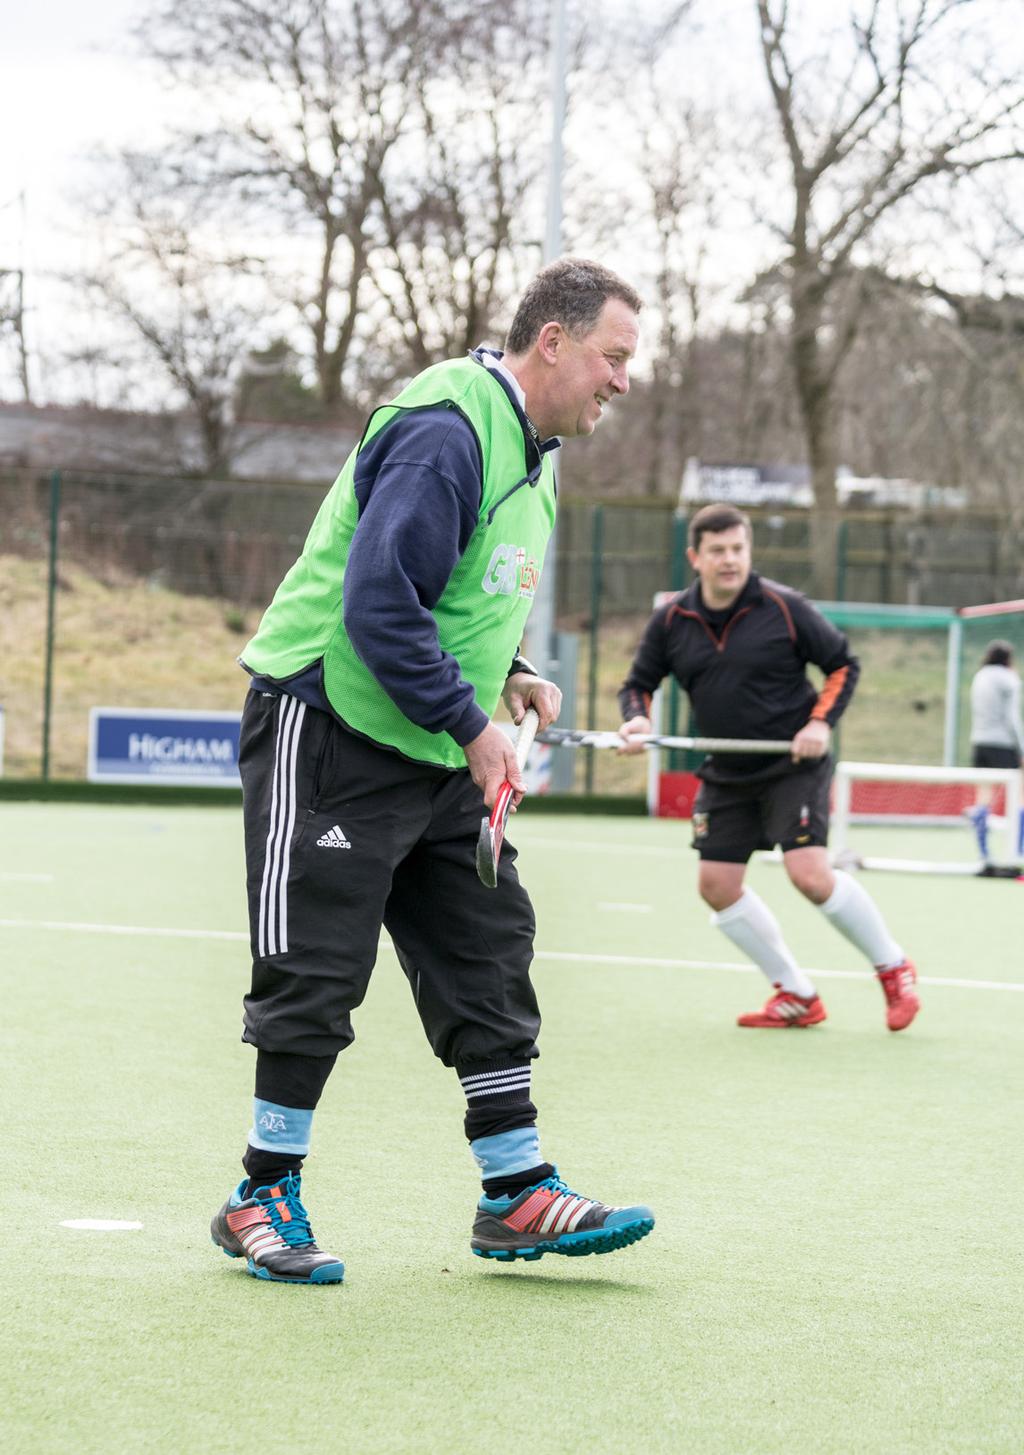 About This Guide This guide has been written in collaboration with Bromsgrove Hockey Club and England Hockey would like to thank them and in particular Alan Gormley for their input